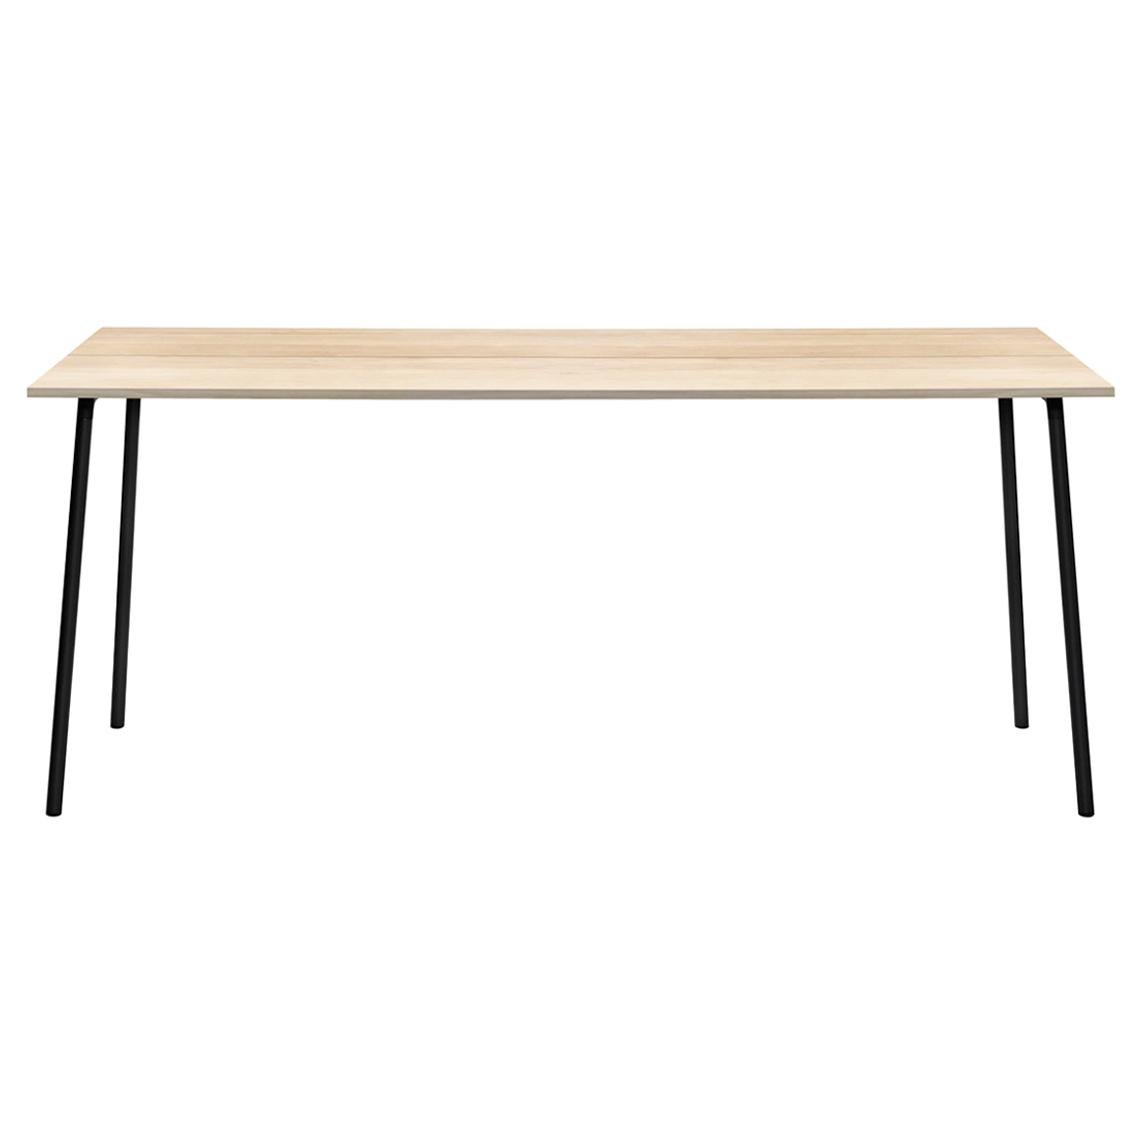 Emeco Run 96" High Table in Accoya with Black Frame by Sam Hecht and Kim Colin For Sale